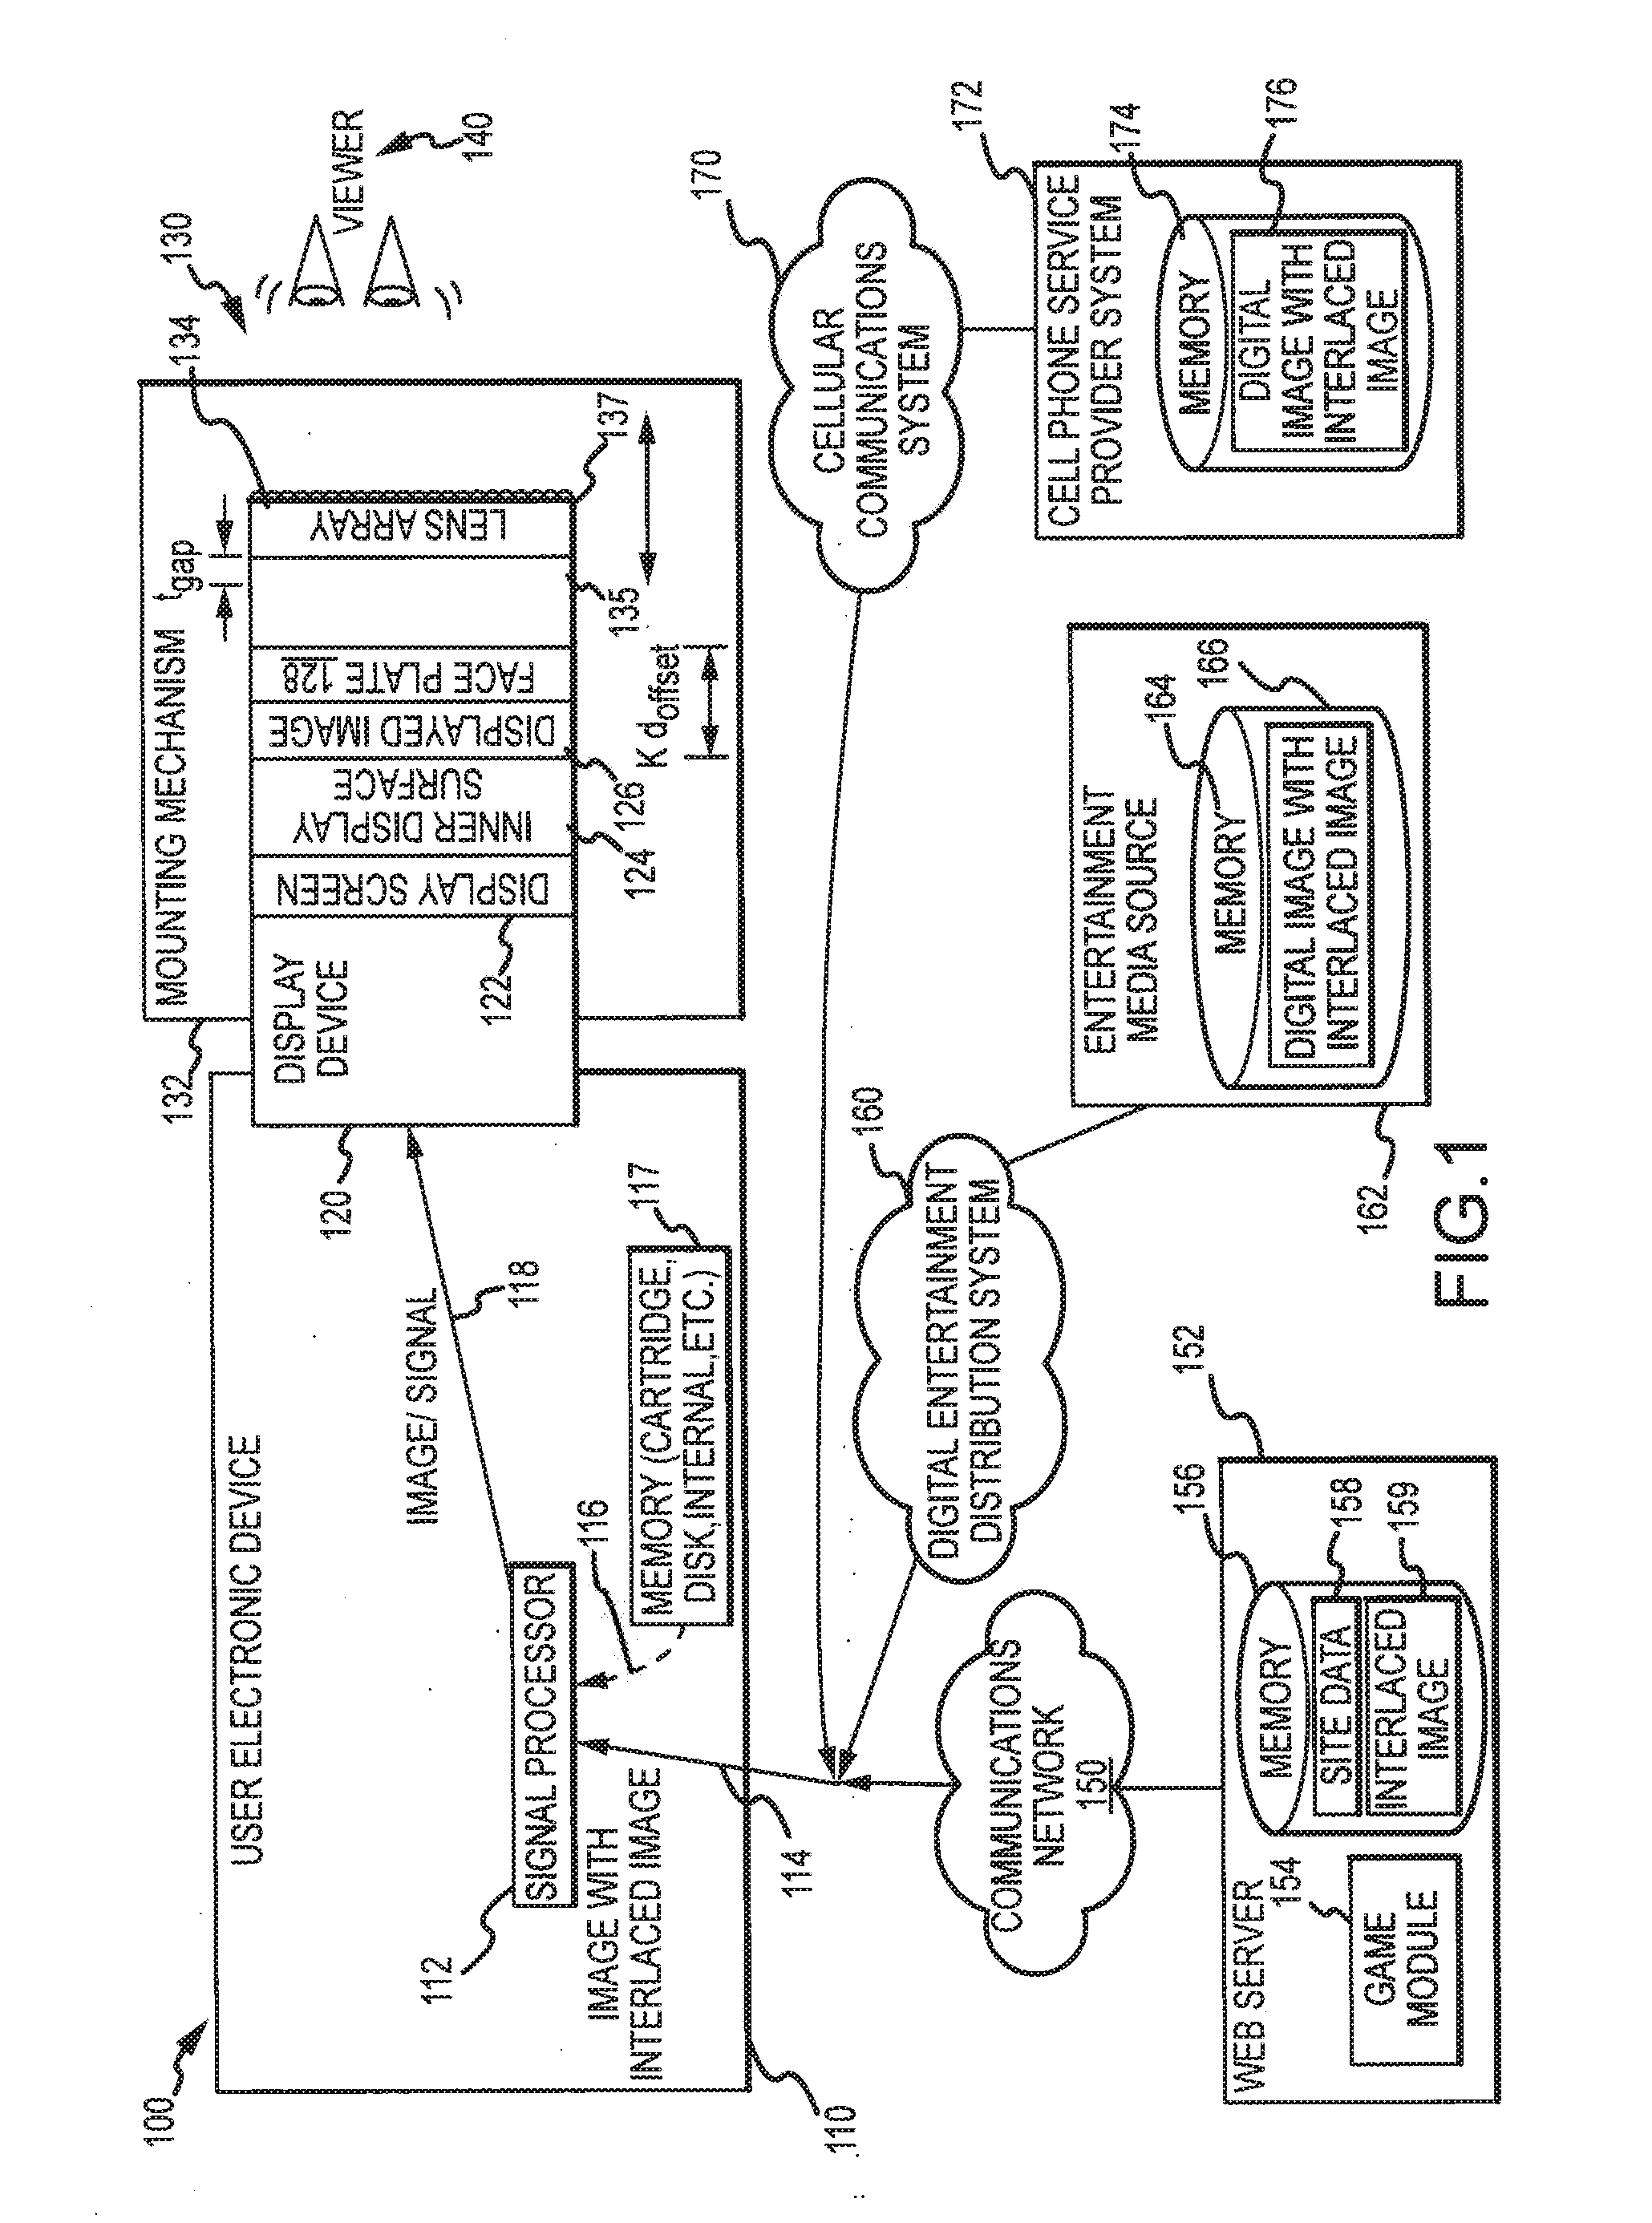 3D display system using a lenticular lens array variably spaced apart from a display screen